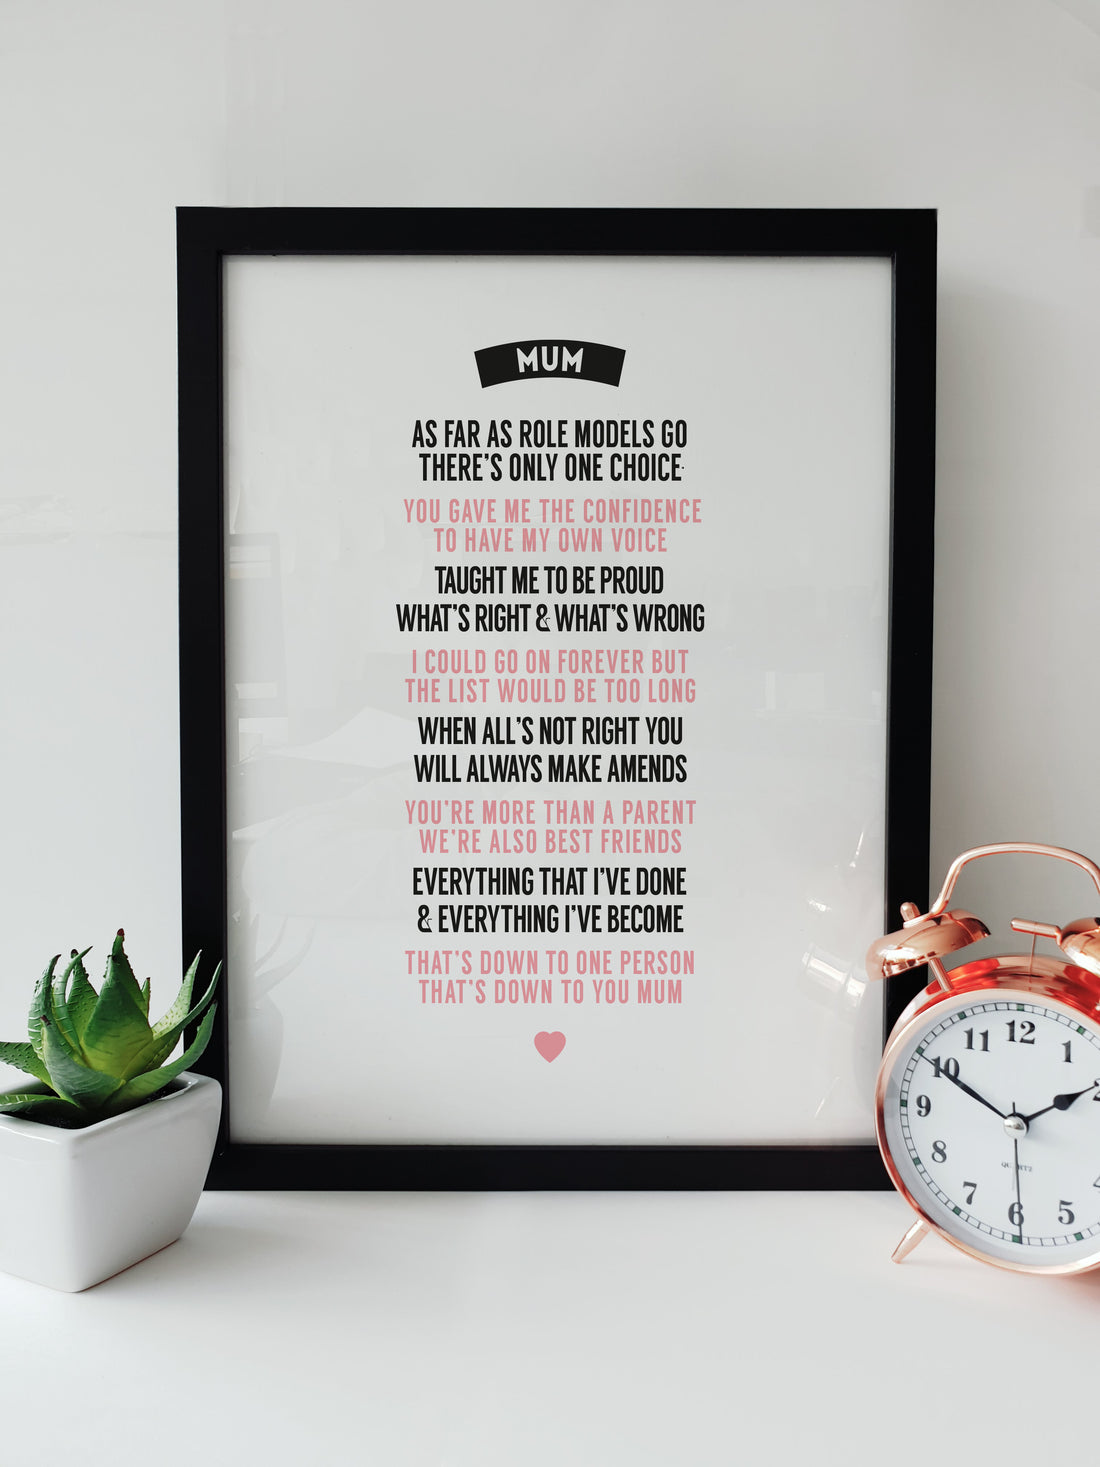 Inspirational Mother's Day poem print by Local Lingo, celebrating the invaluable role of a mum as a life's role model, in a classic and elegant A4 design.